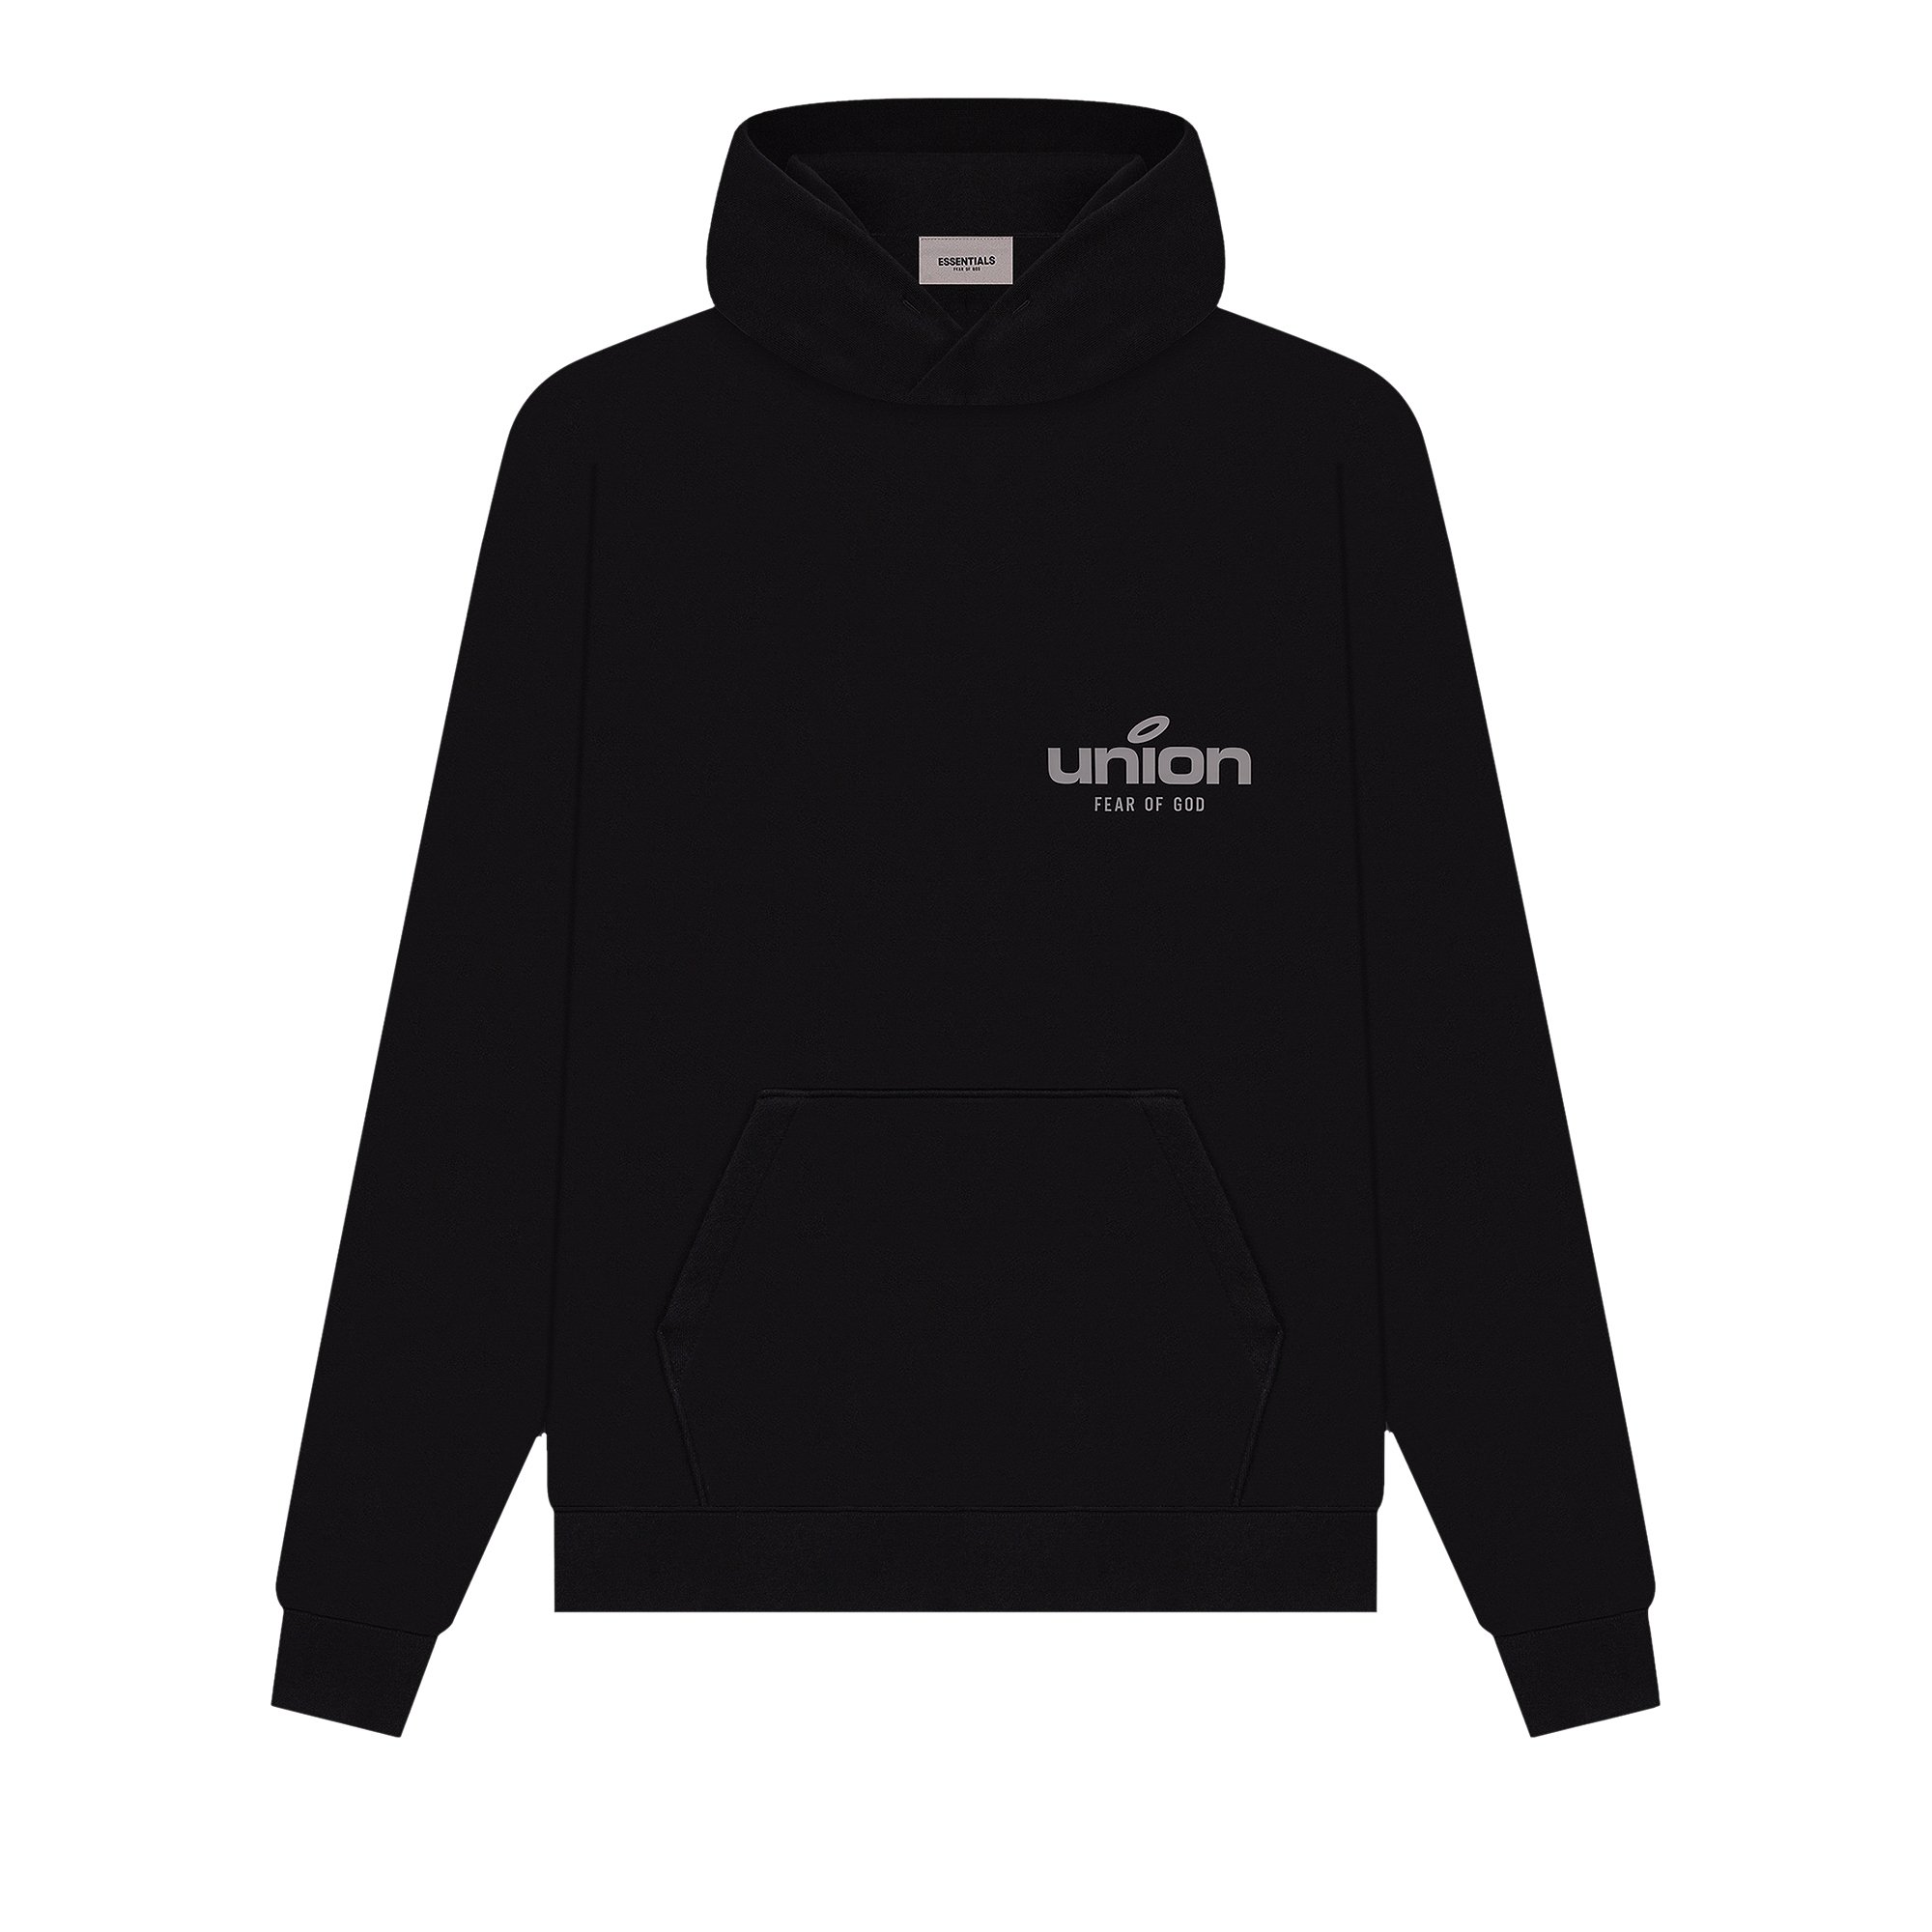 Fear of God Essentials x Union Vintage Pullover Hoodie 'Black'